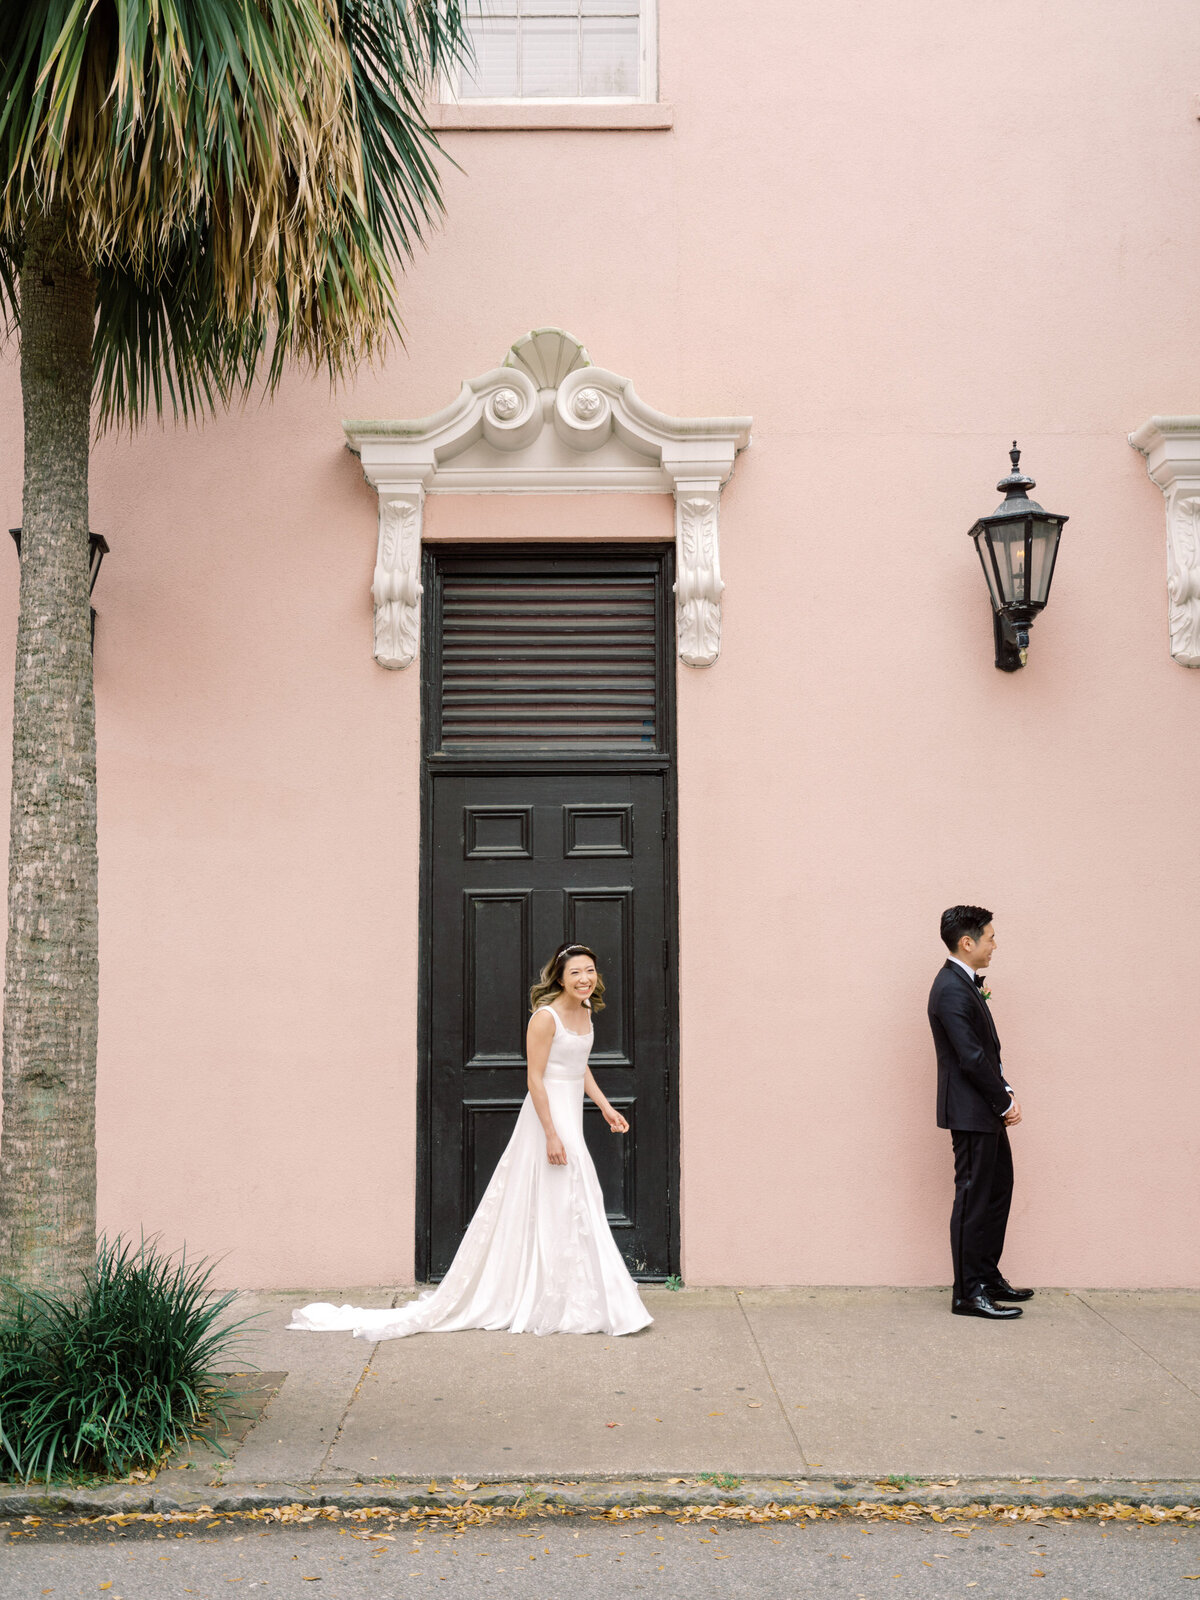 Cannon-Green-Wedding-in-charleston-photo-by-philip-casey-photography-029